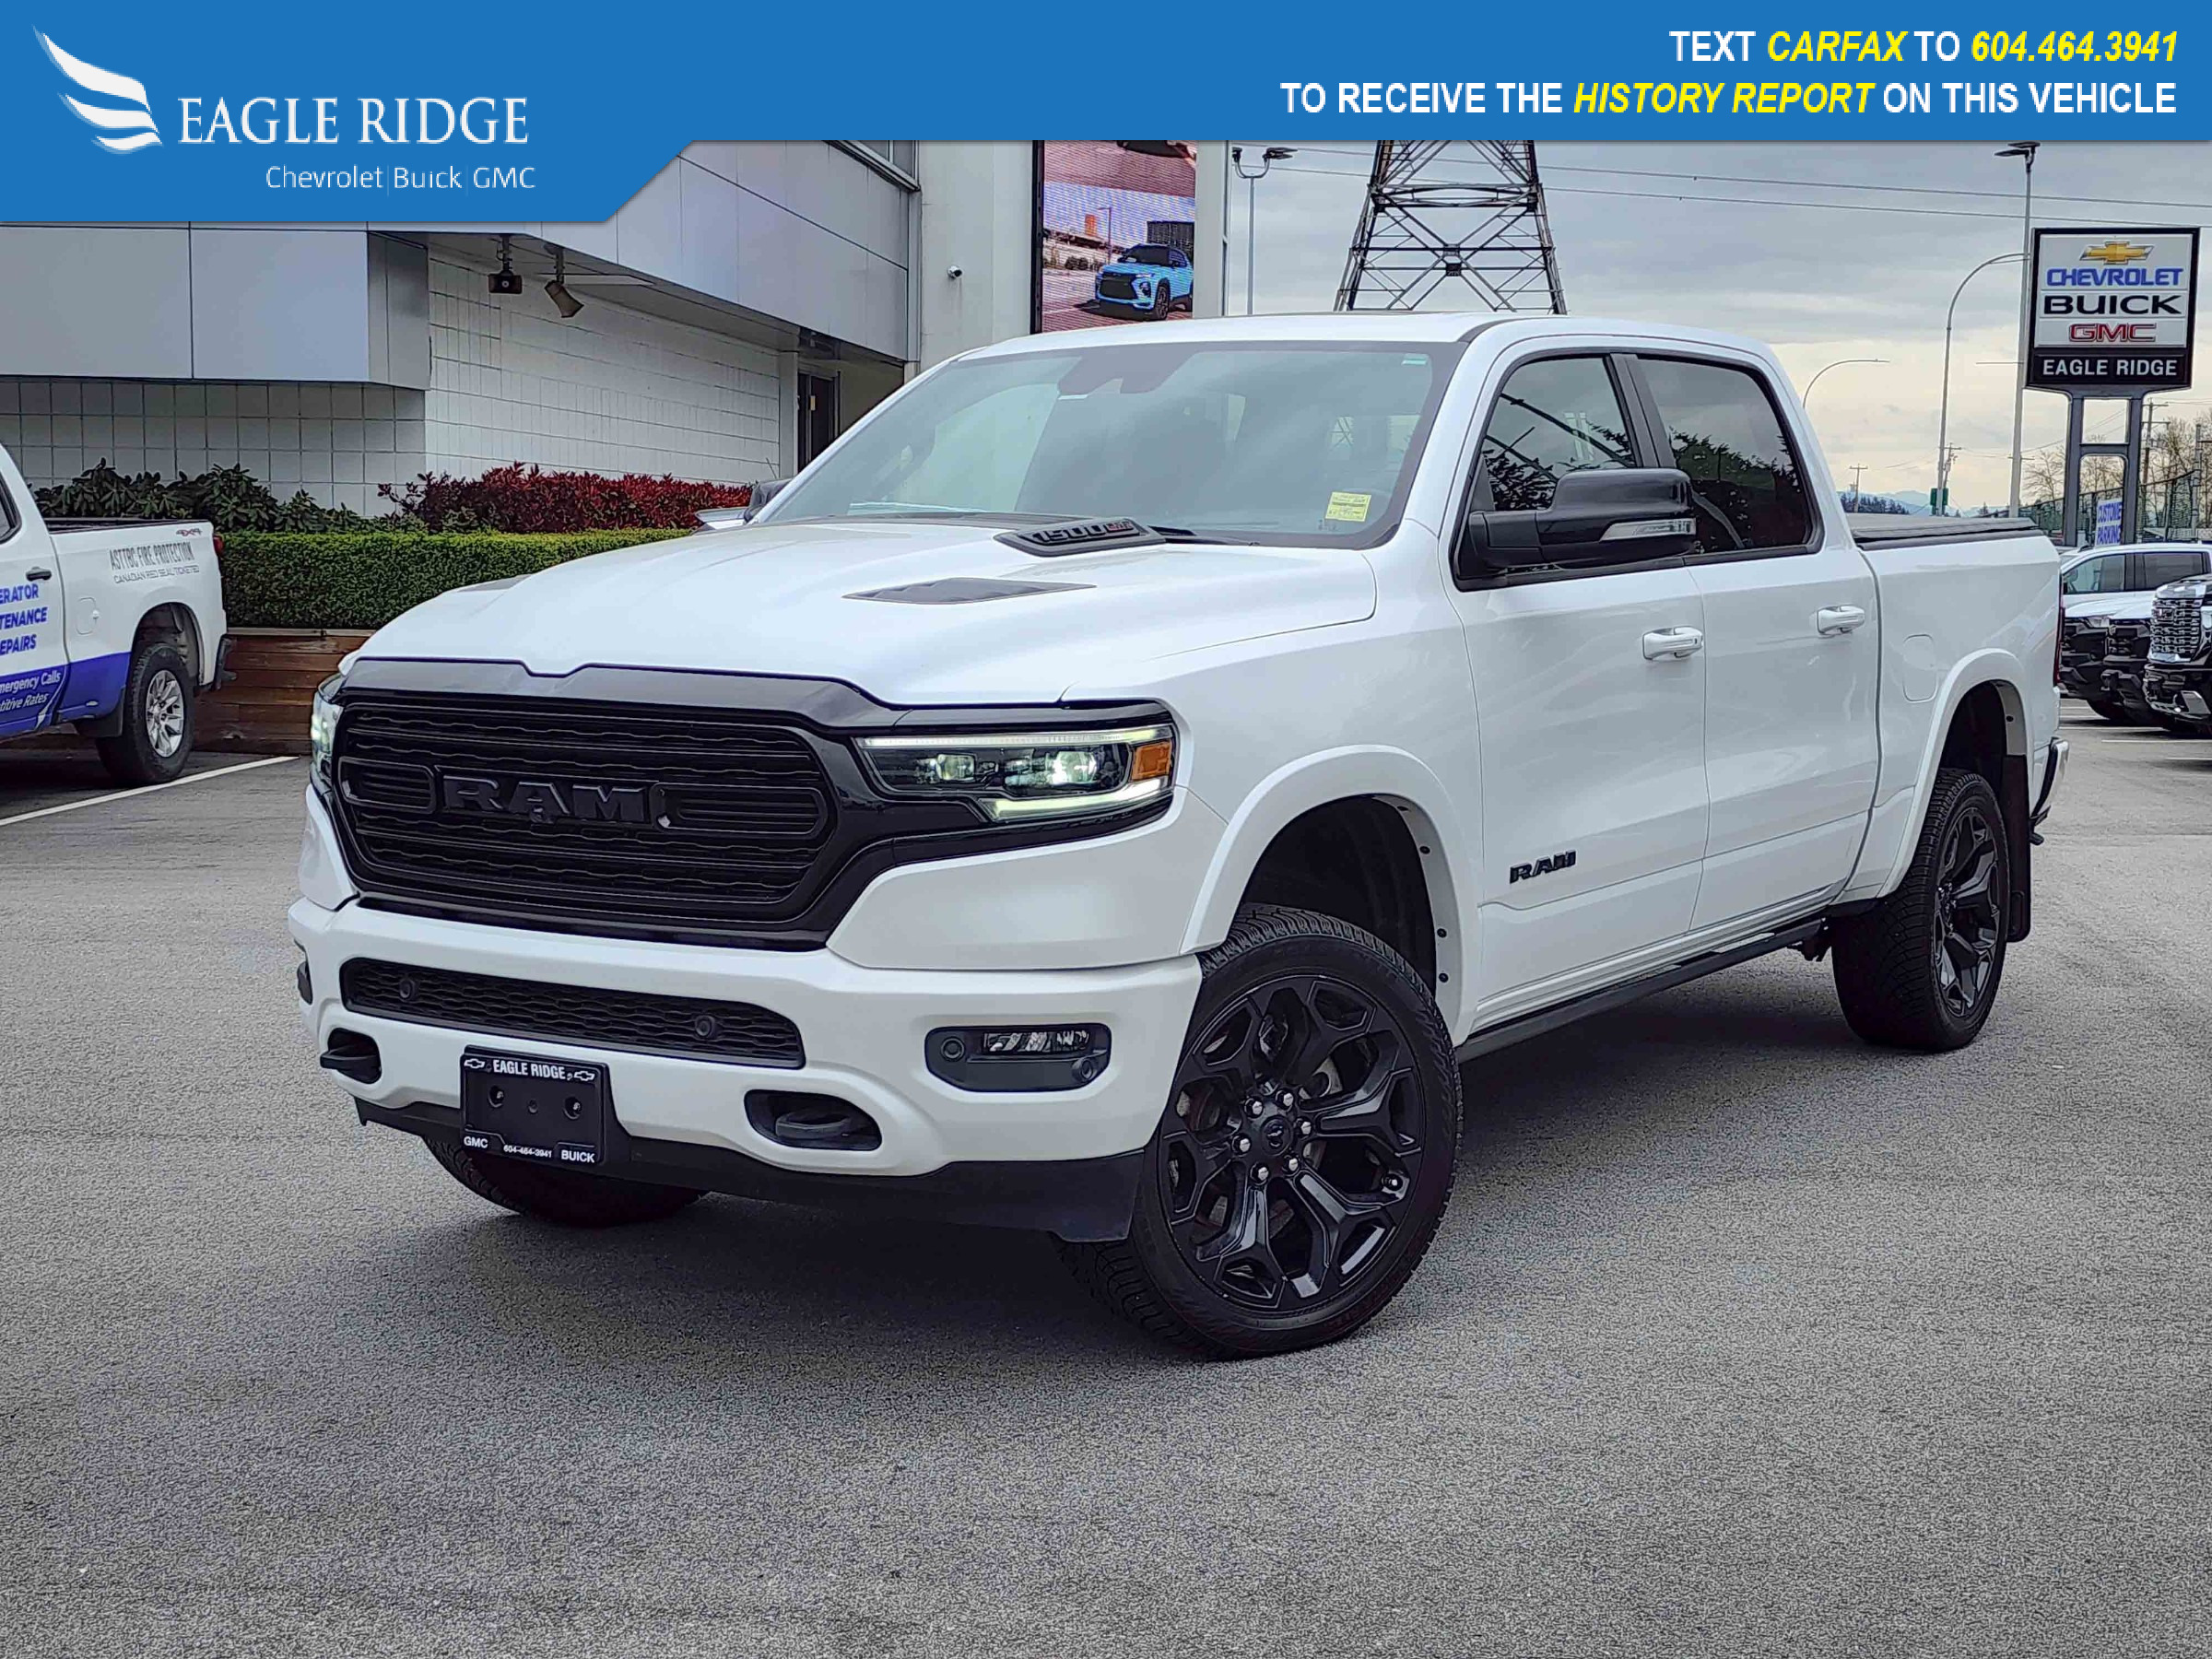 2022 Ram 1500 Limited 4x4, Active Noise Control System, Adaptive